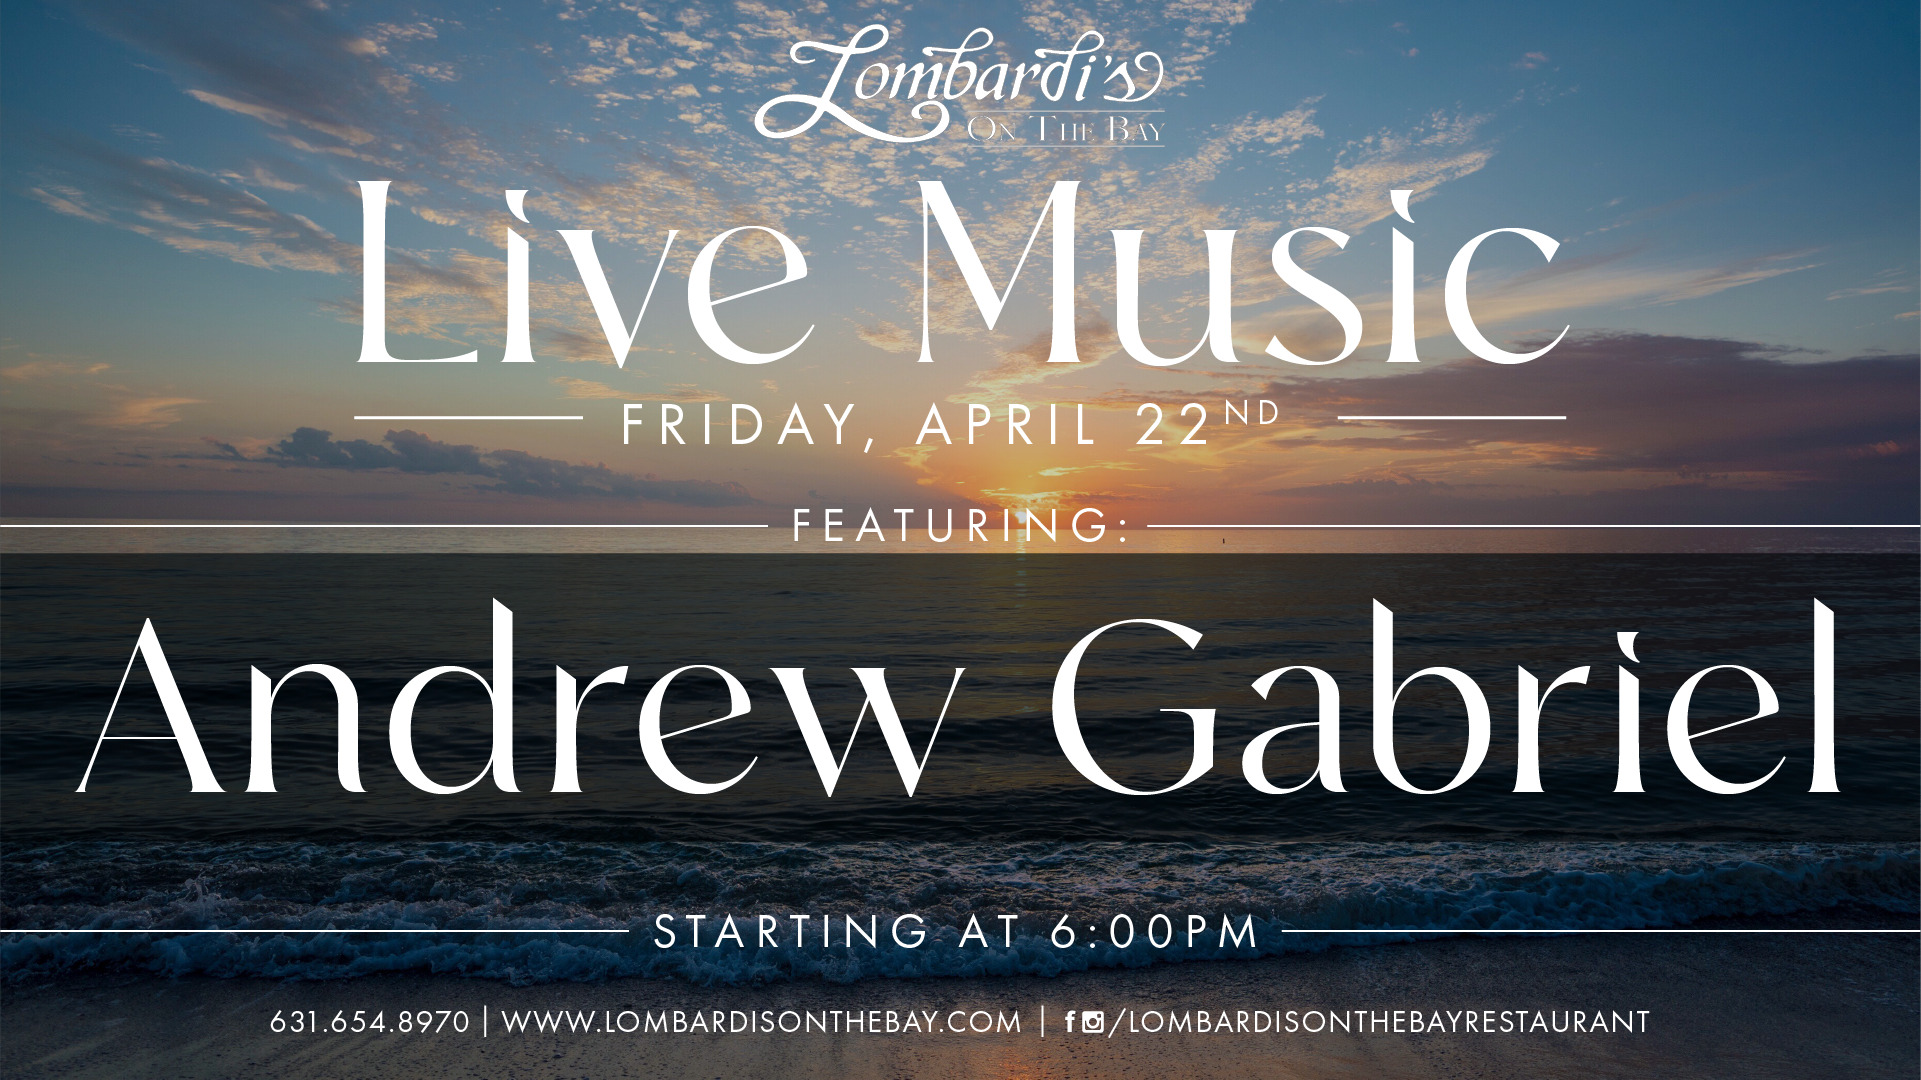 Get the weekend started with the sounds of Andrew Gabriel! Music begins at 6:30PM